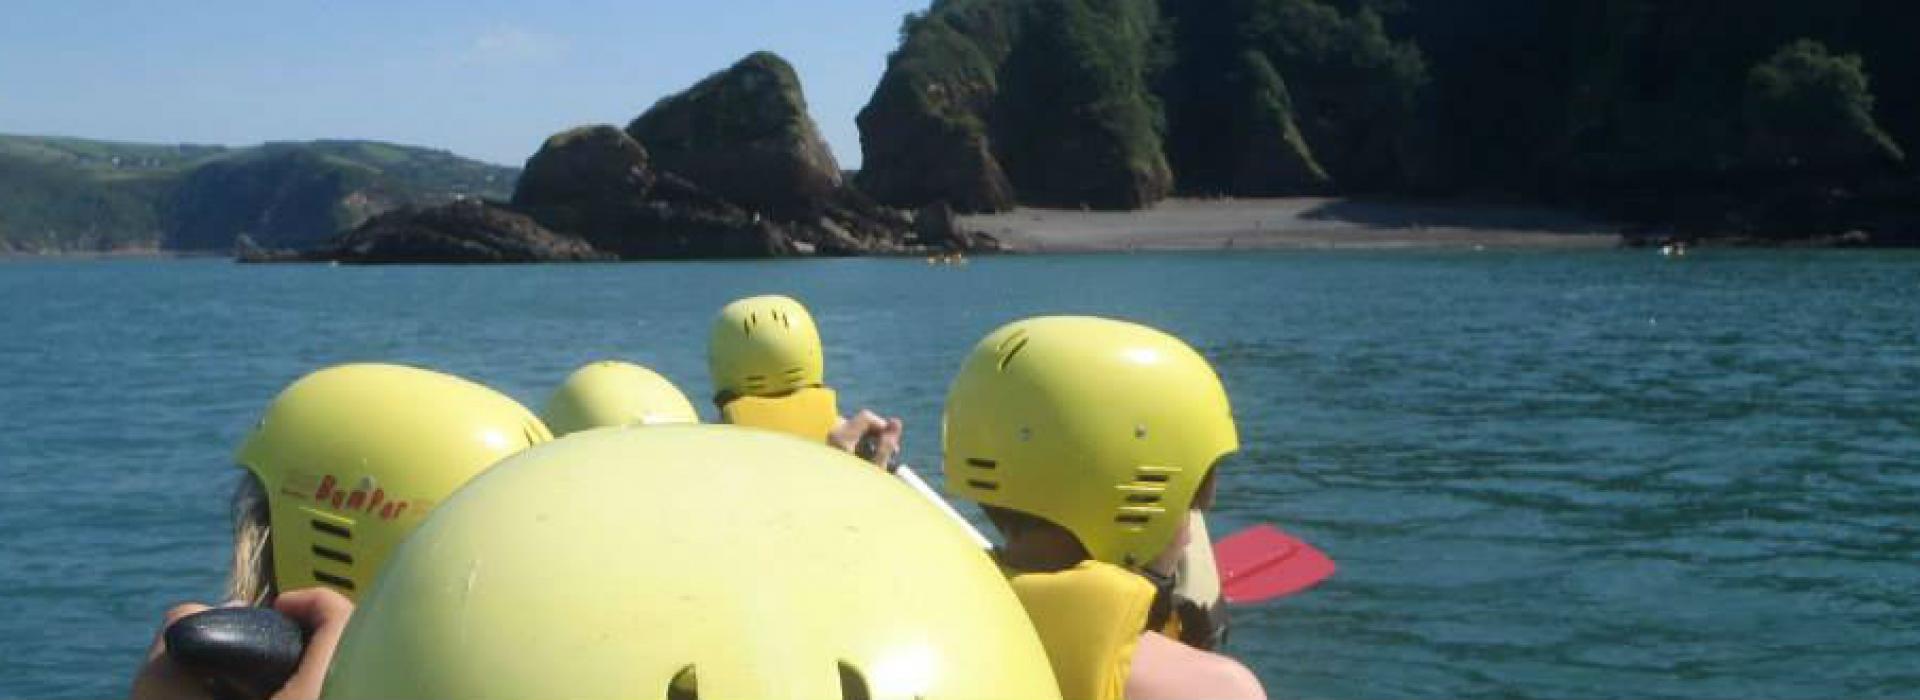 scout adventures, scout camp, watersports, things to do in devon